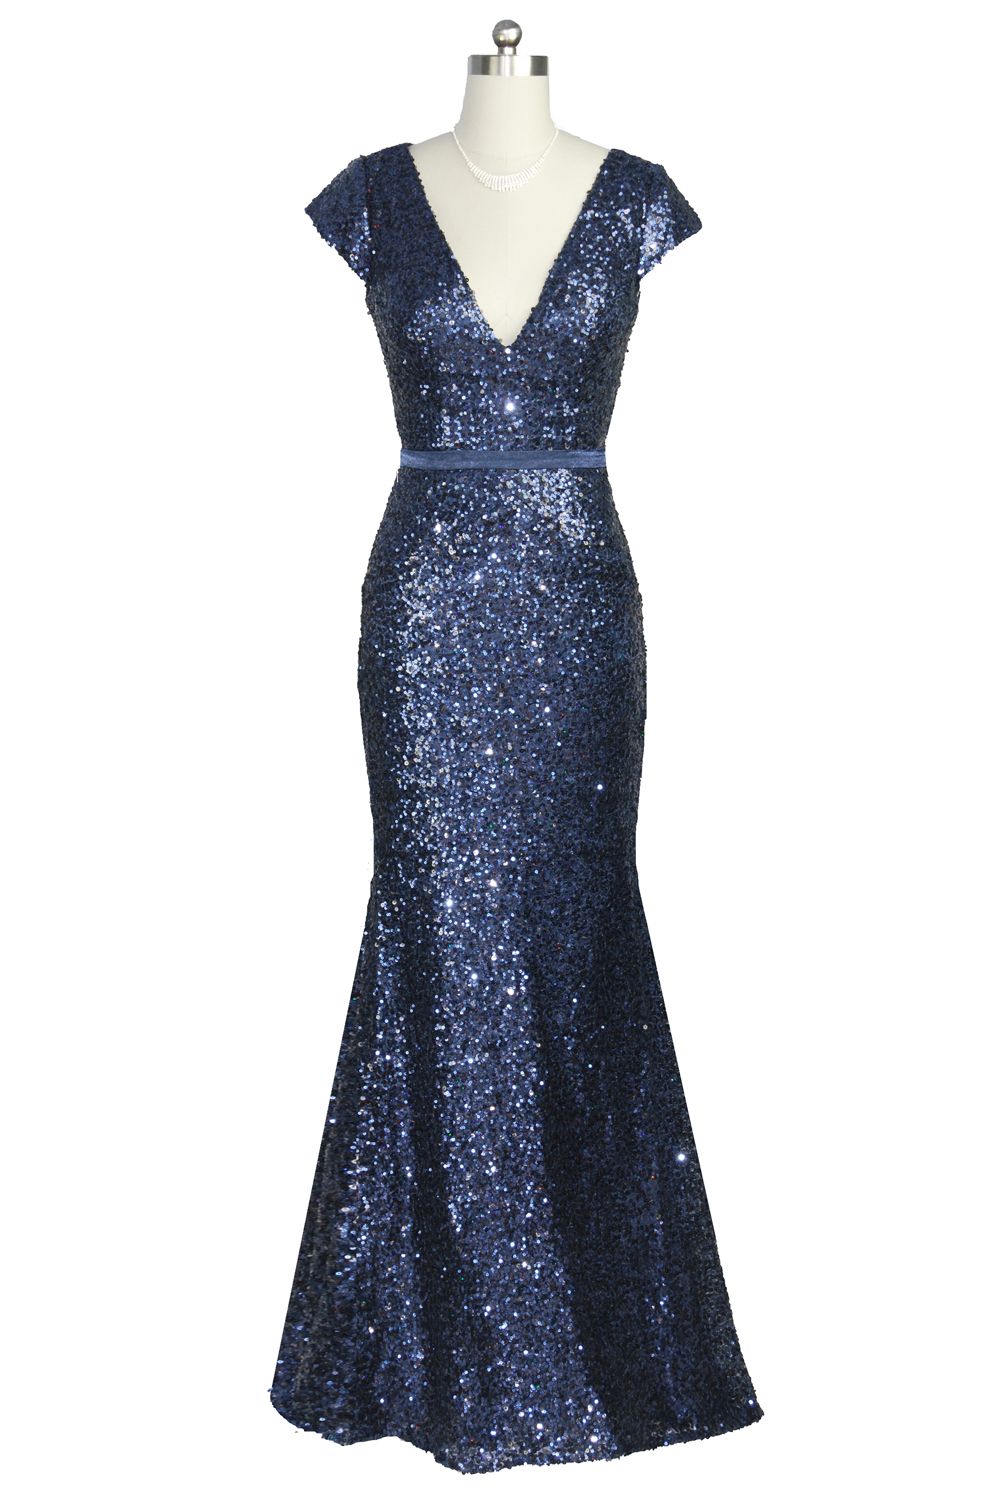 Blue Dress With Sequins & Clothes Review